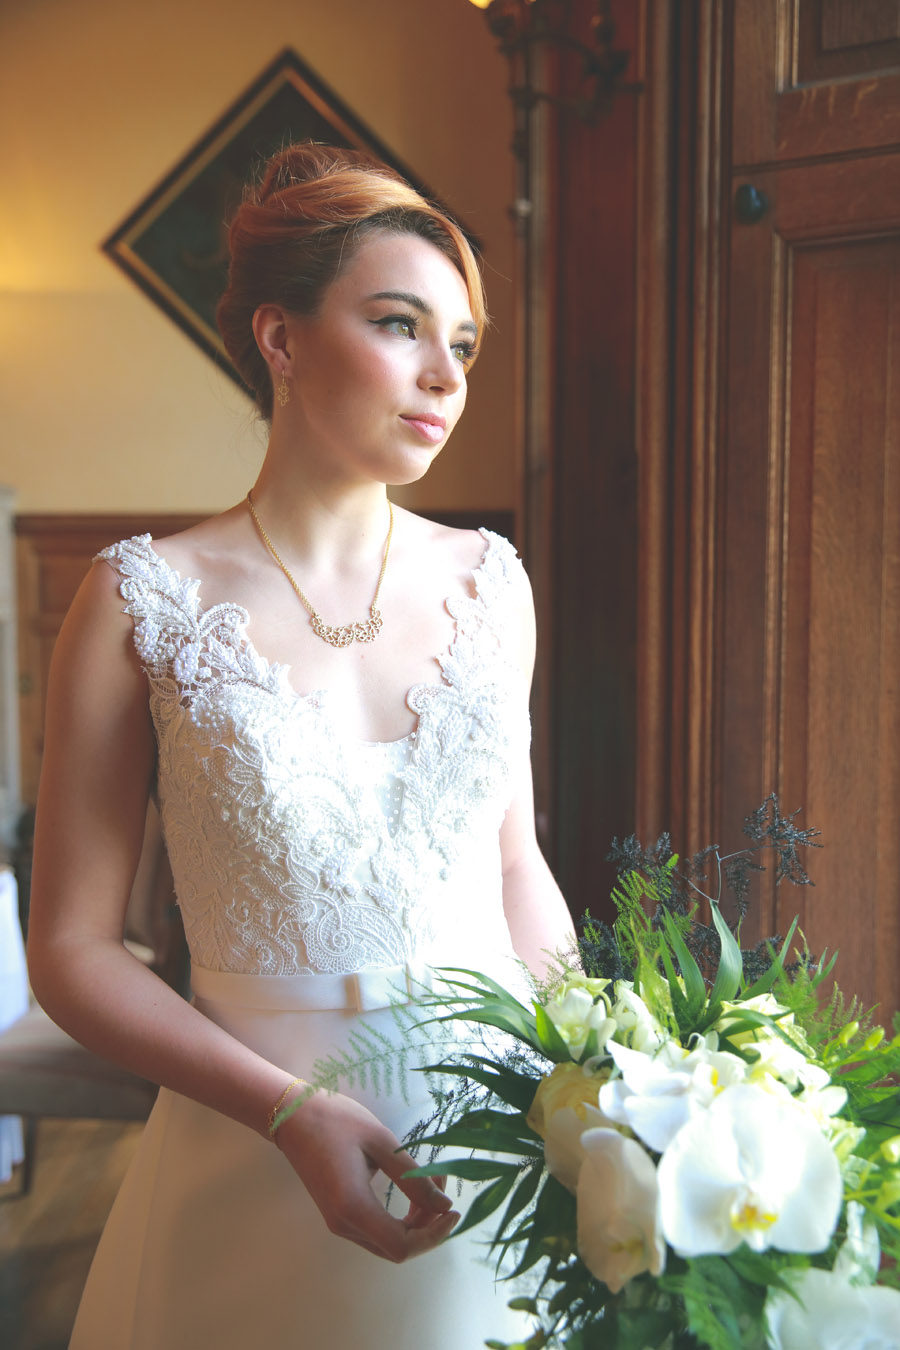 Classic couture wedding styling at the Elvetham, image credit Nicola Rowley Photography (7)